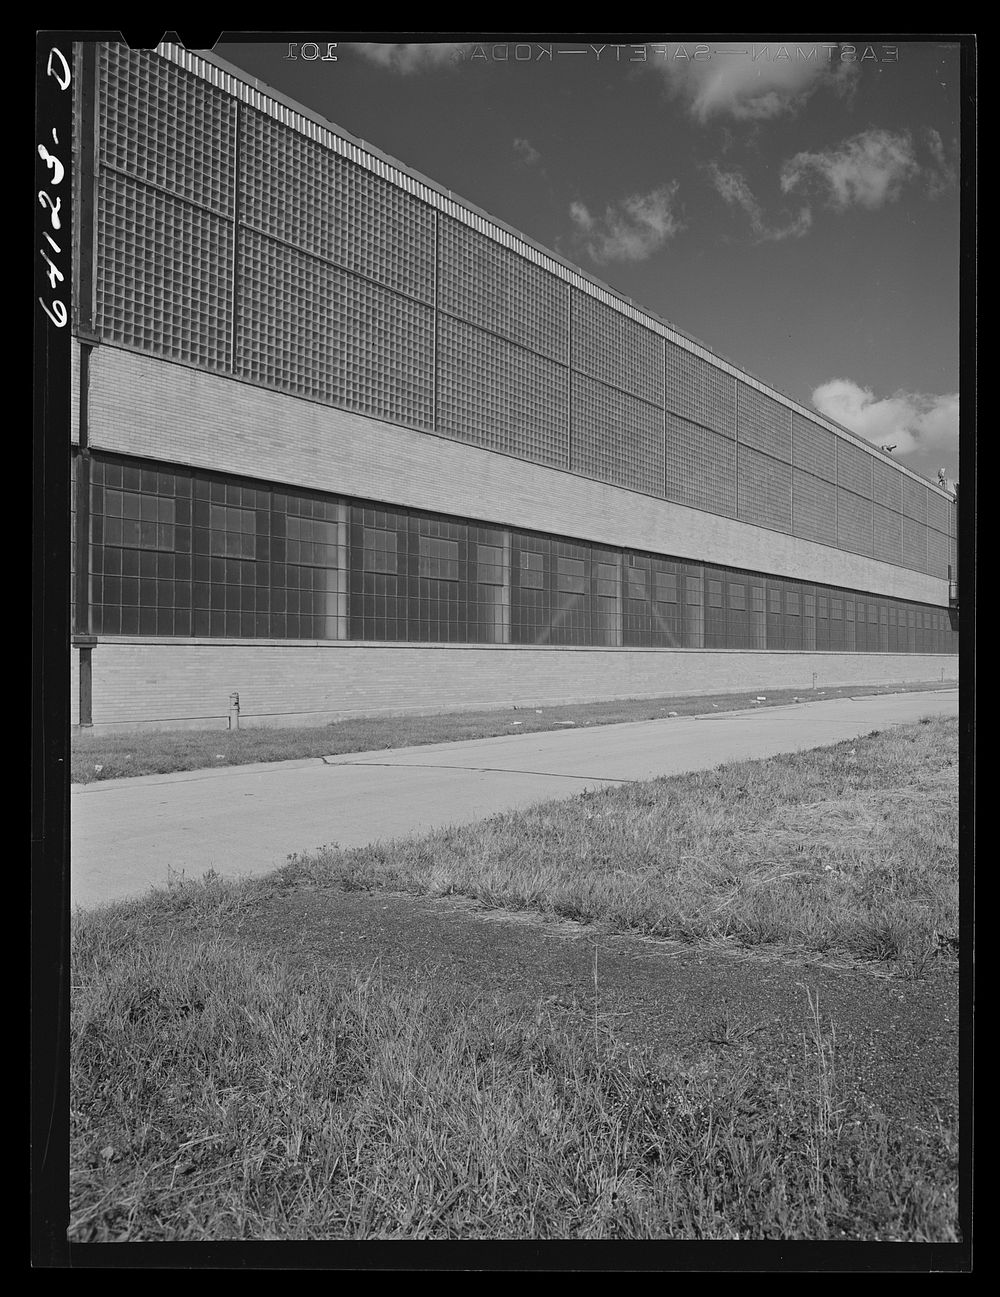 [Untitled photo, possibly related to: General Motors plant. Trenton, New Jersey]. Sourced from the Library of Congress.